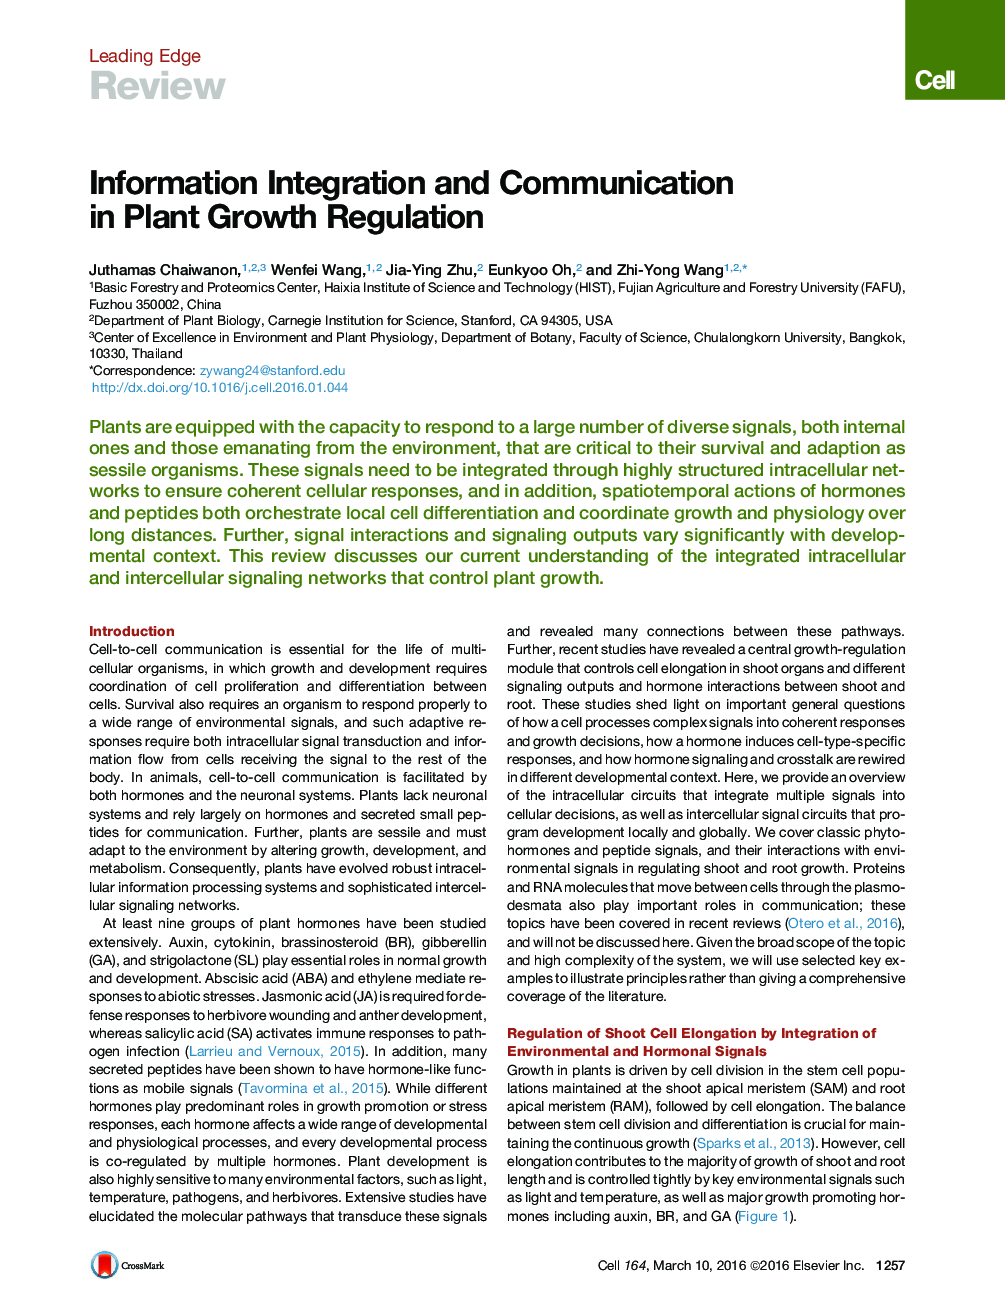 Information Integration and Communication in Plant Growth Regulation